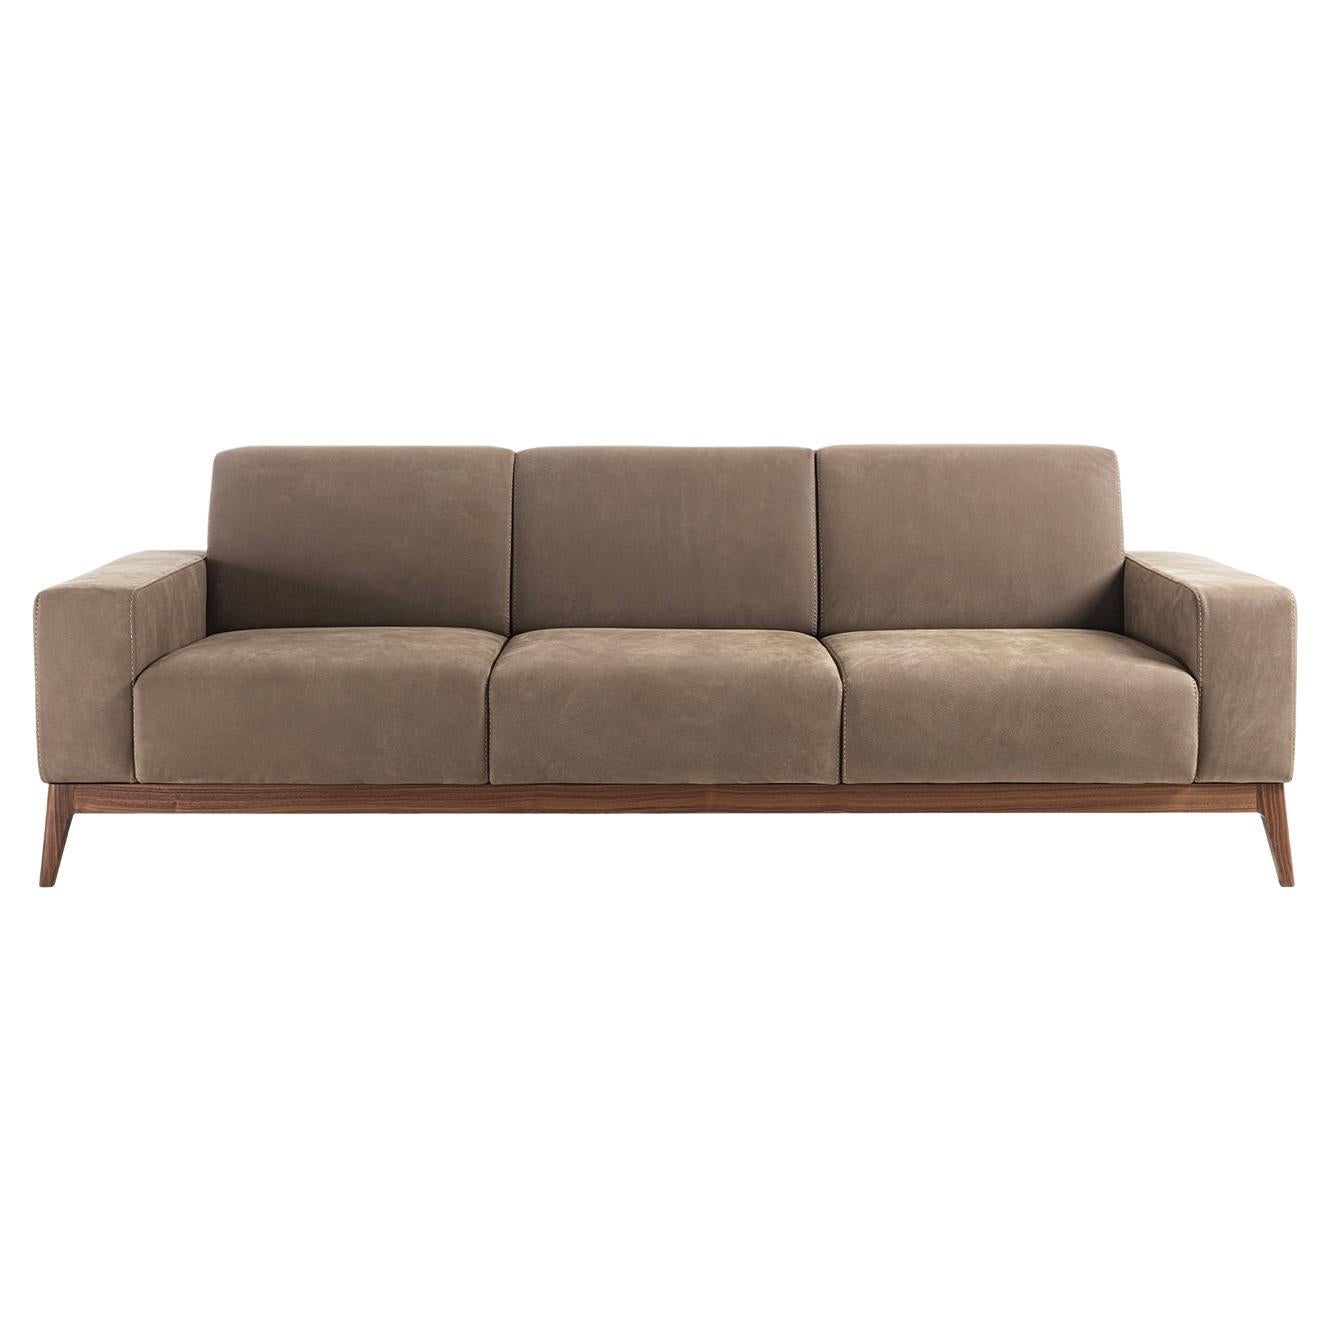 Hermitage 3 Seater Taupe Sofa For Sale